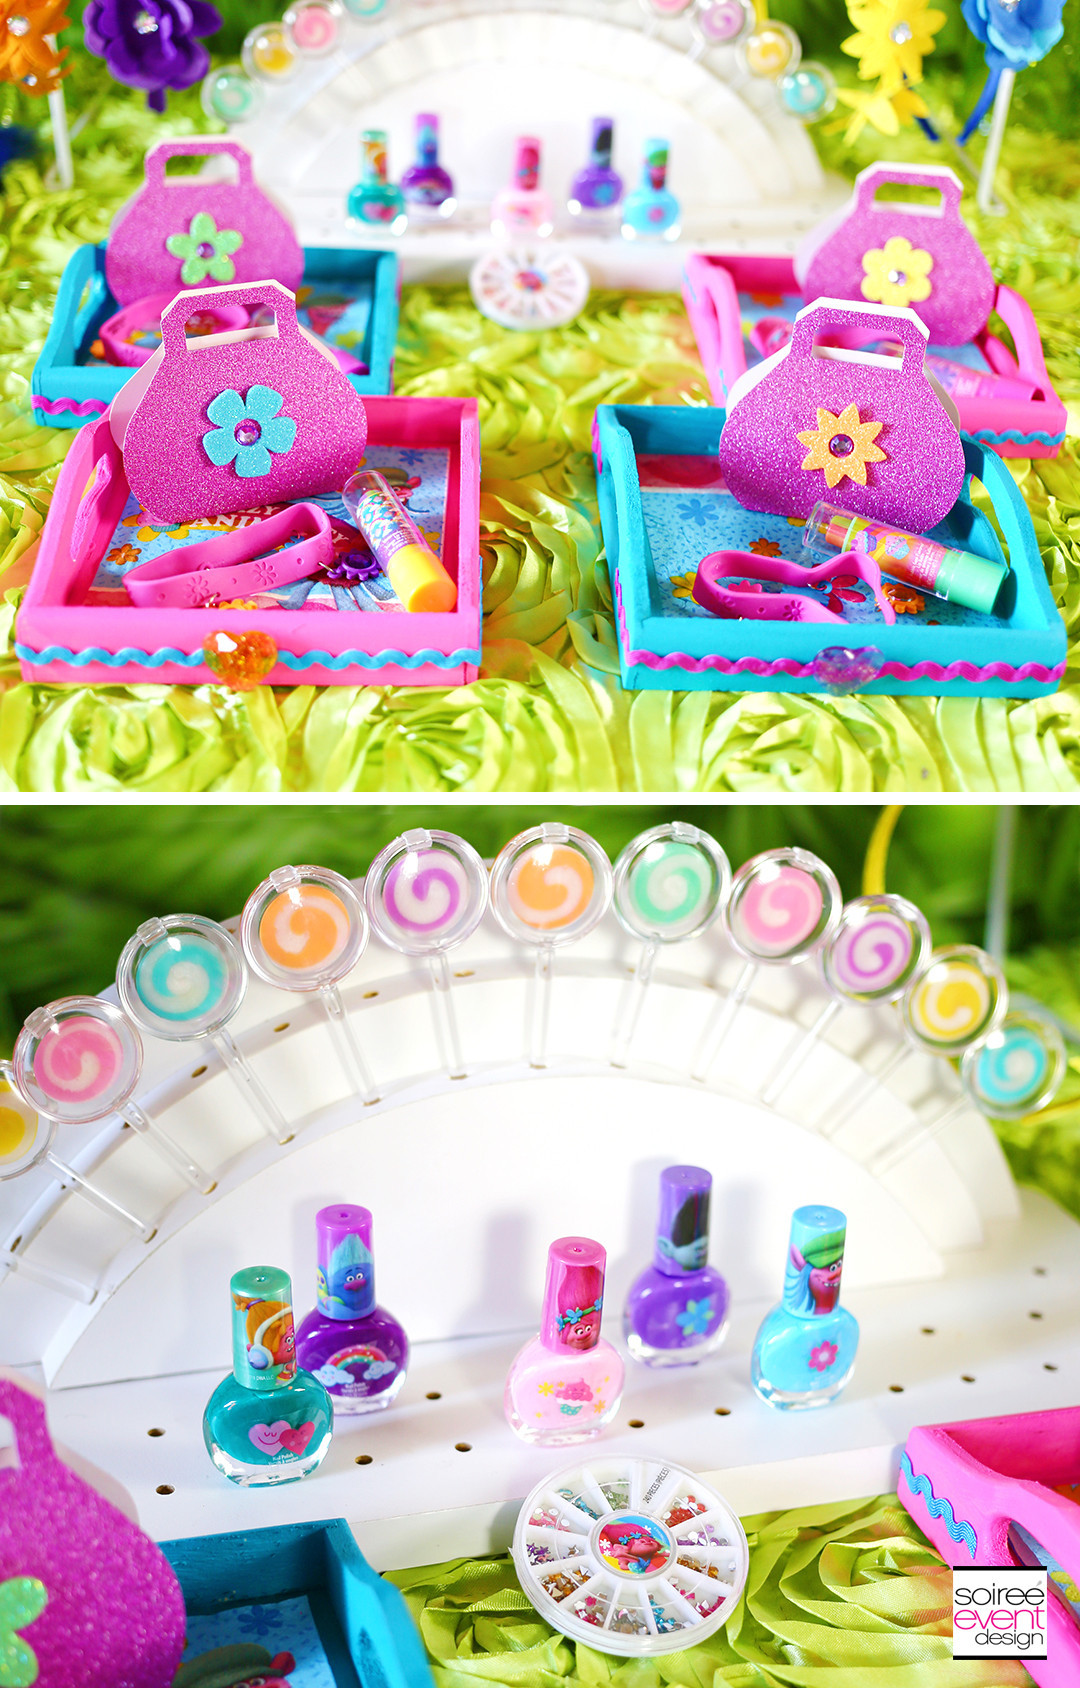 Trolls Pool Party Ideas
 The top 25 Ideas About Trolls Pool Birthday Party Ideas